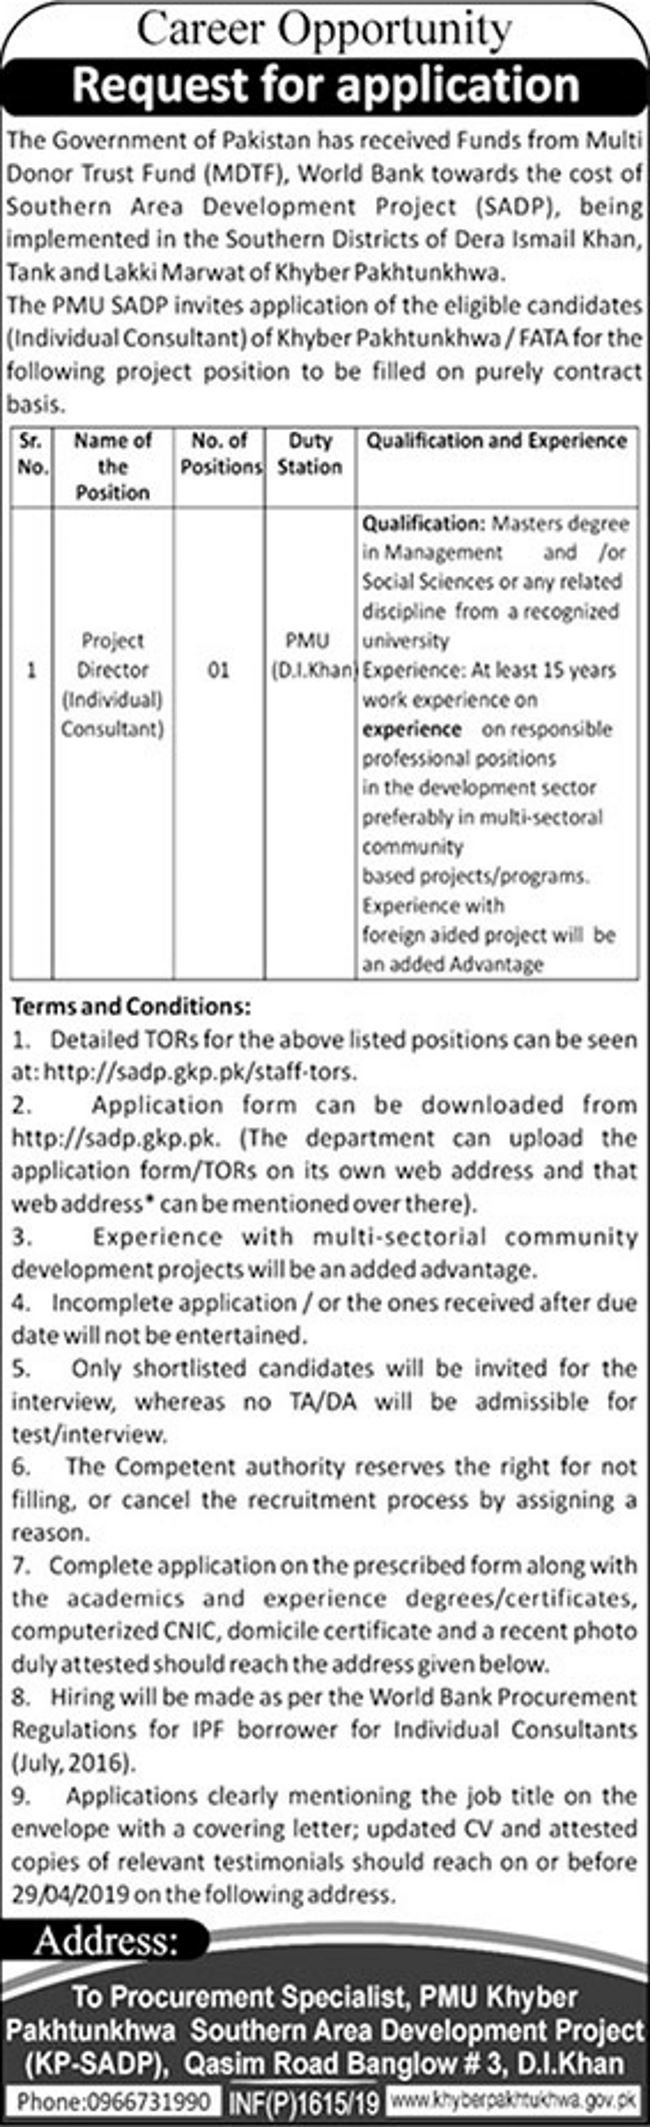 KP Southern Area Development Project Jobs 2019 for Project Director